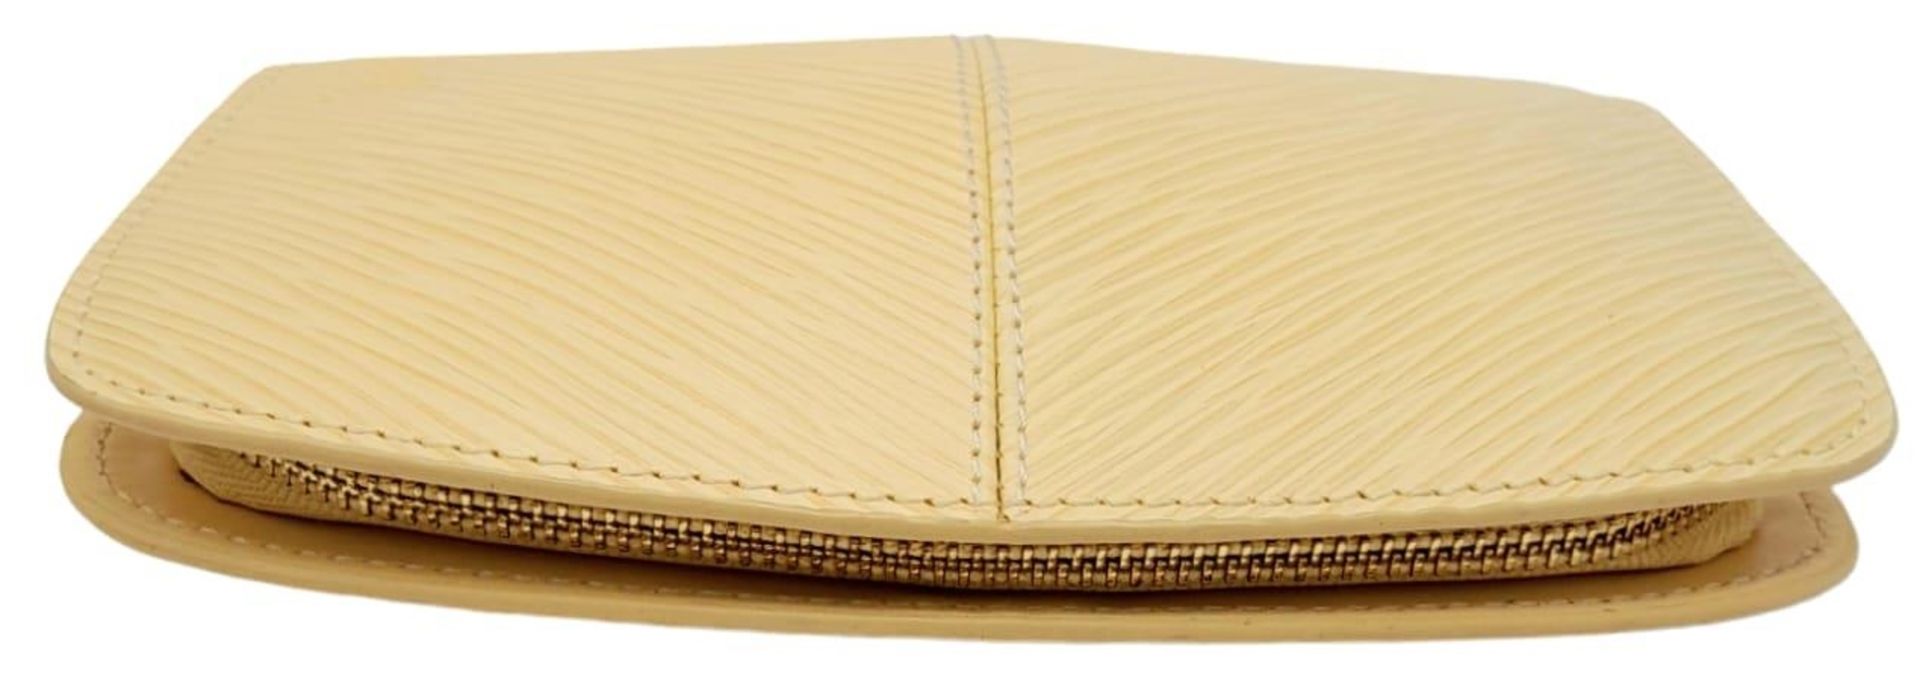 A Louis Vuitton Vanilla Wallet. Epi leather exterior gold-toned hardware and zipped top closure. - Image 4 of 9